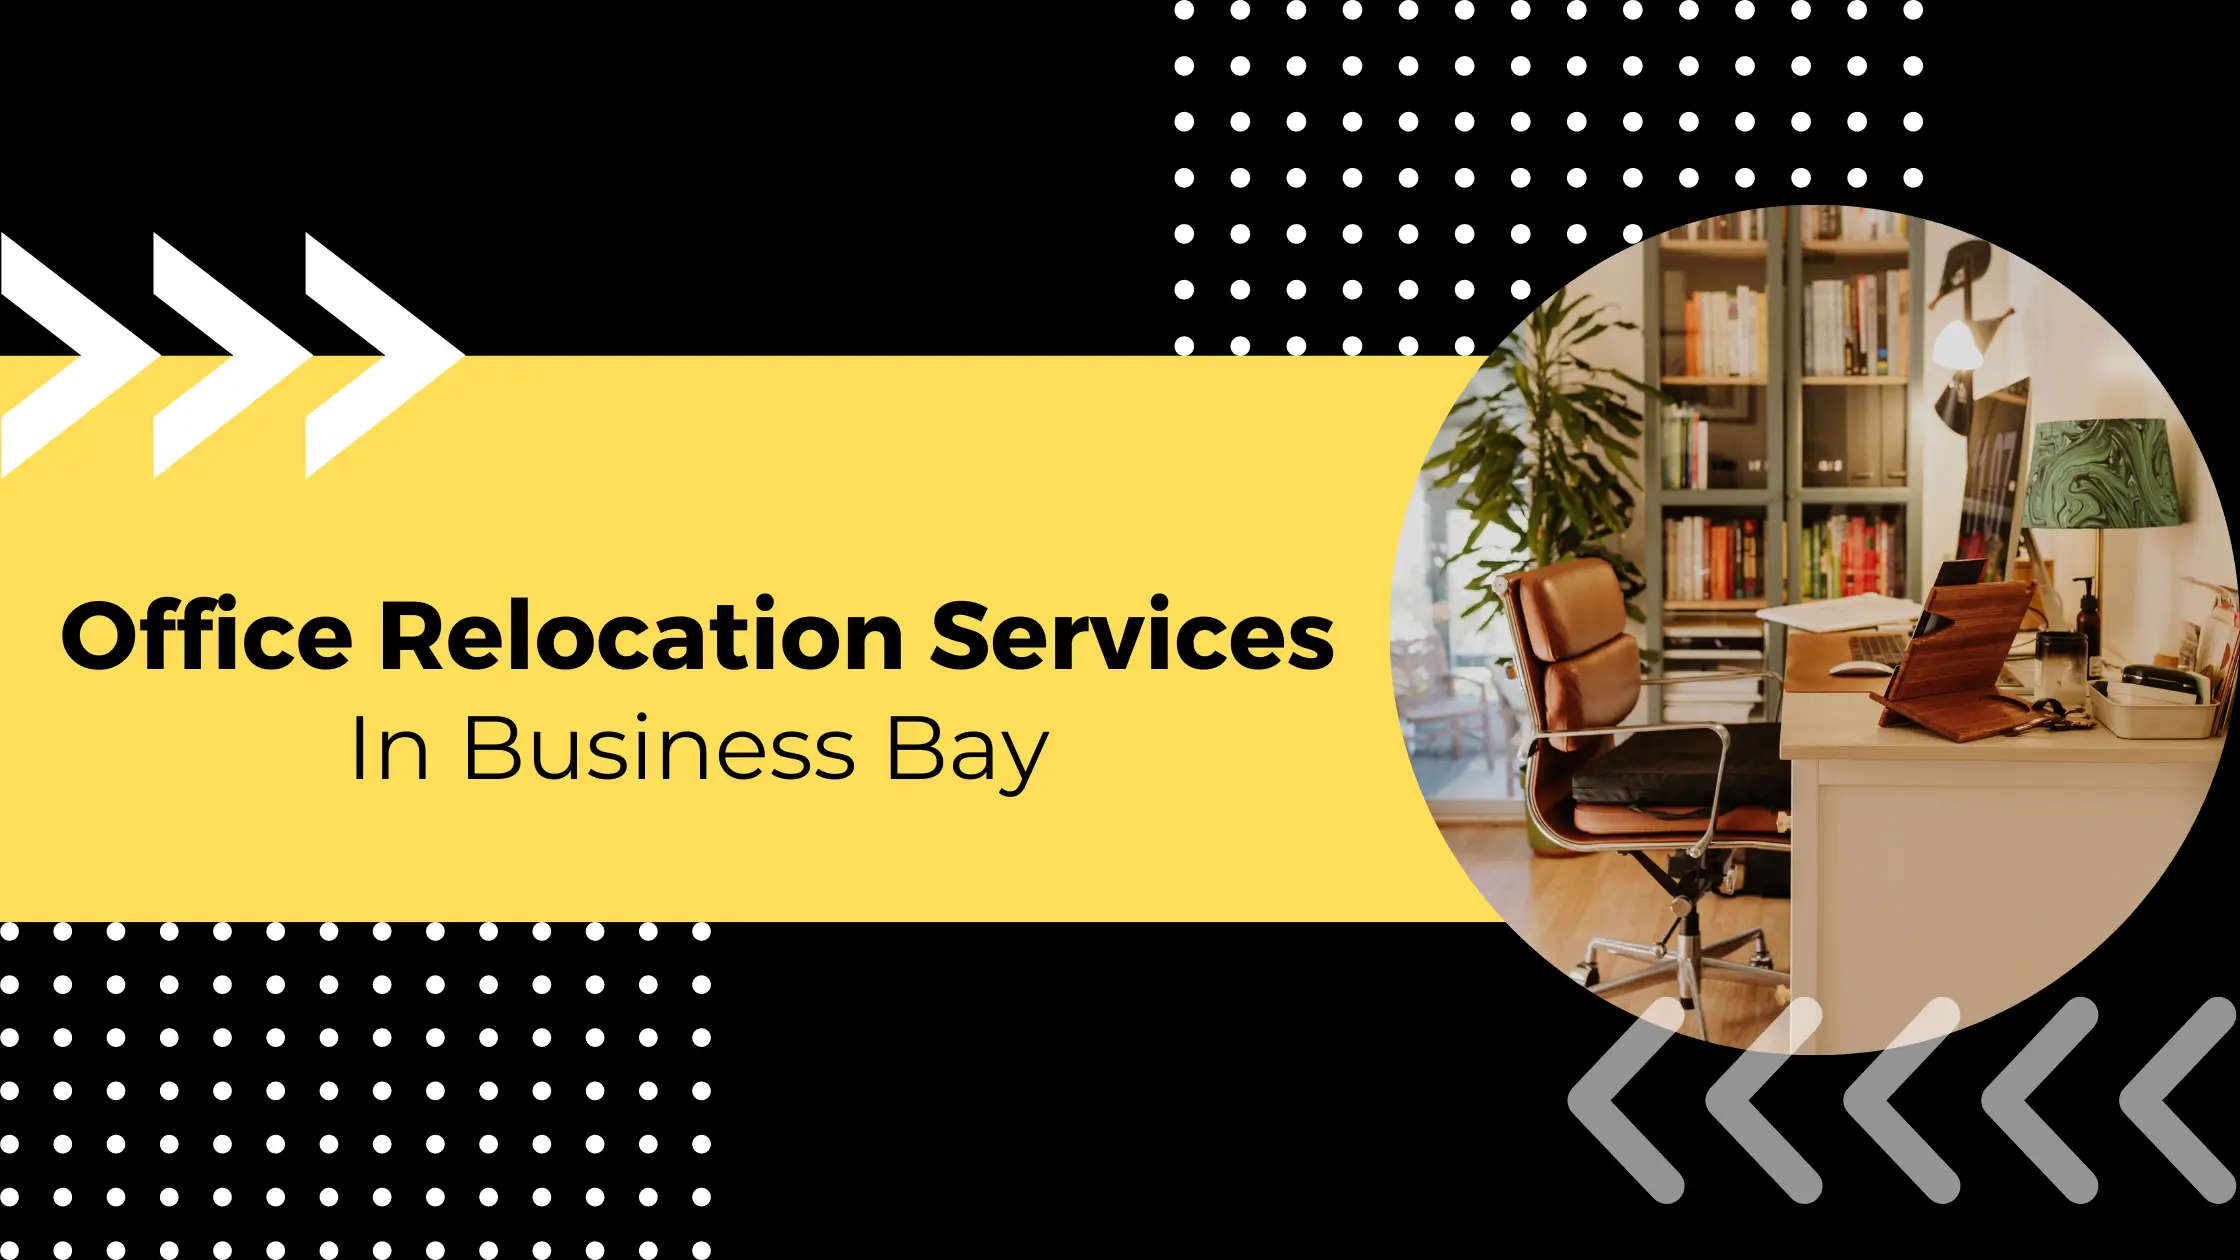 Office Relocation Services in Business Bay